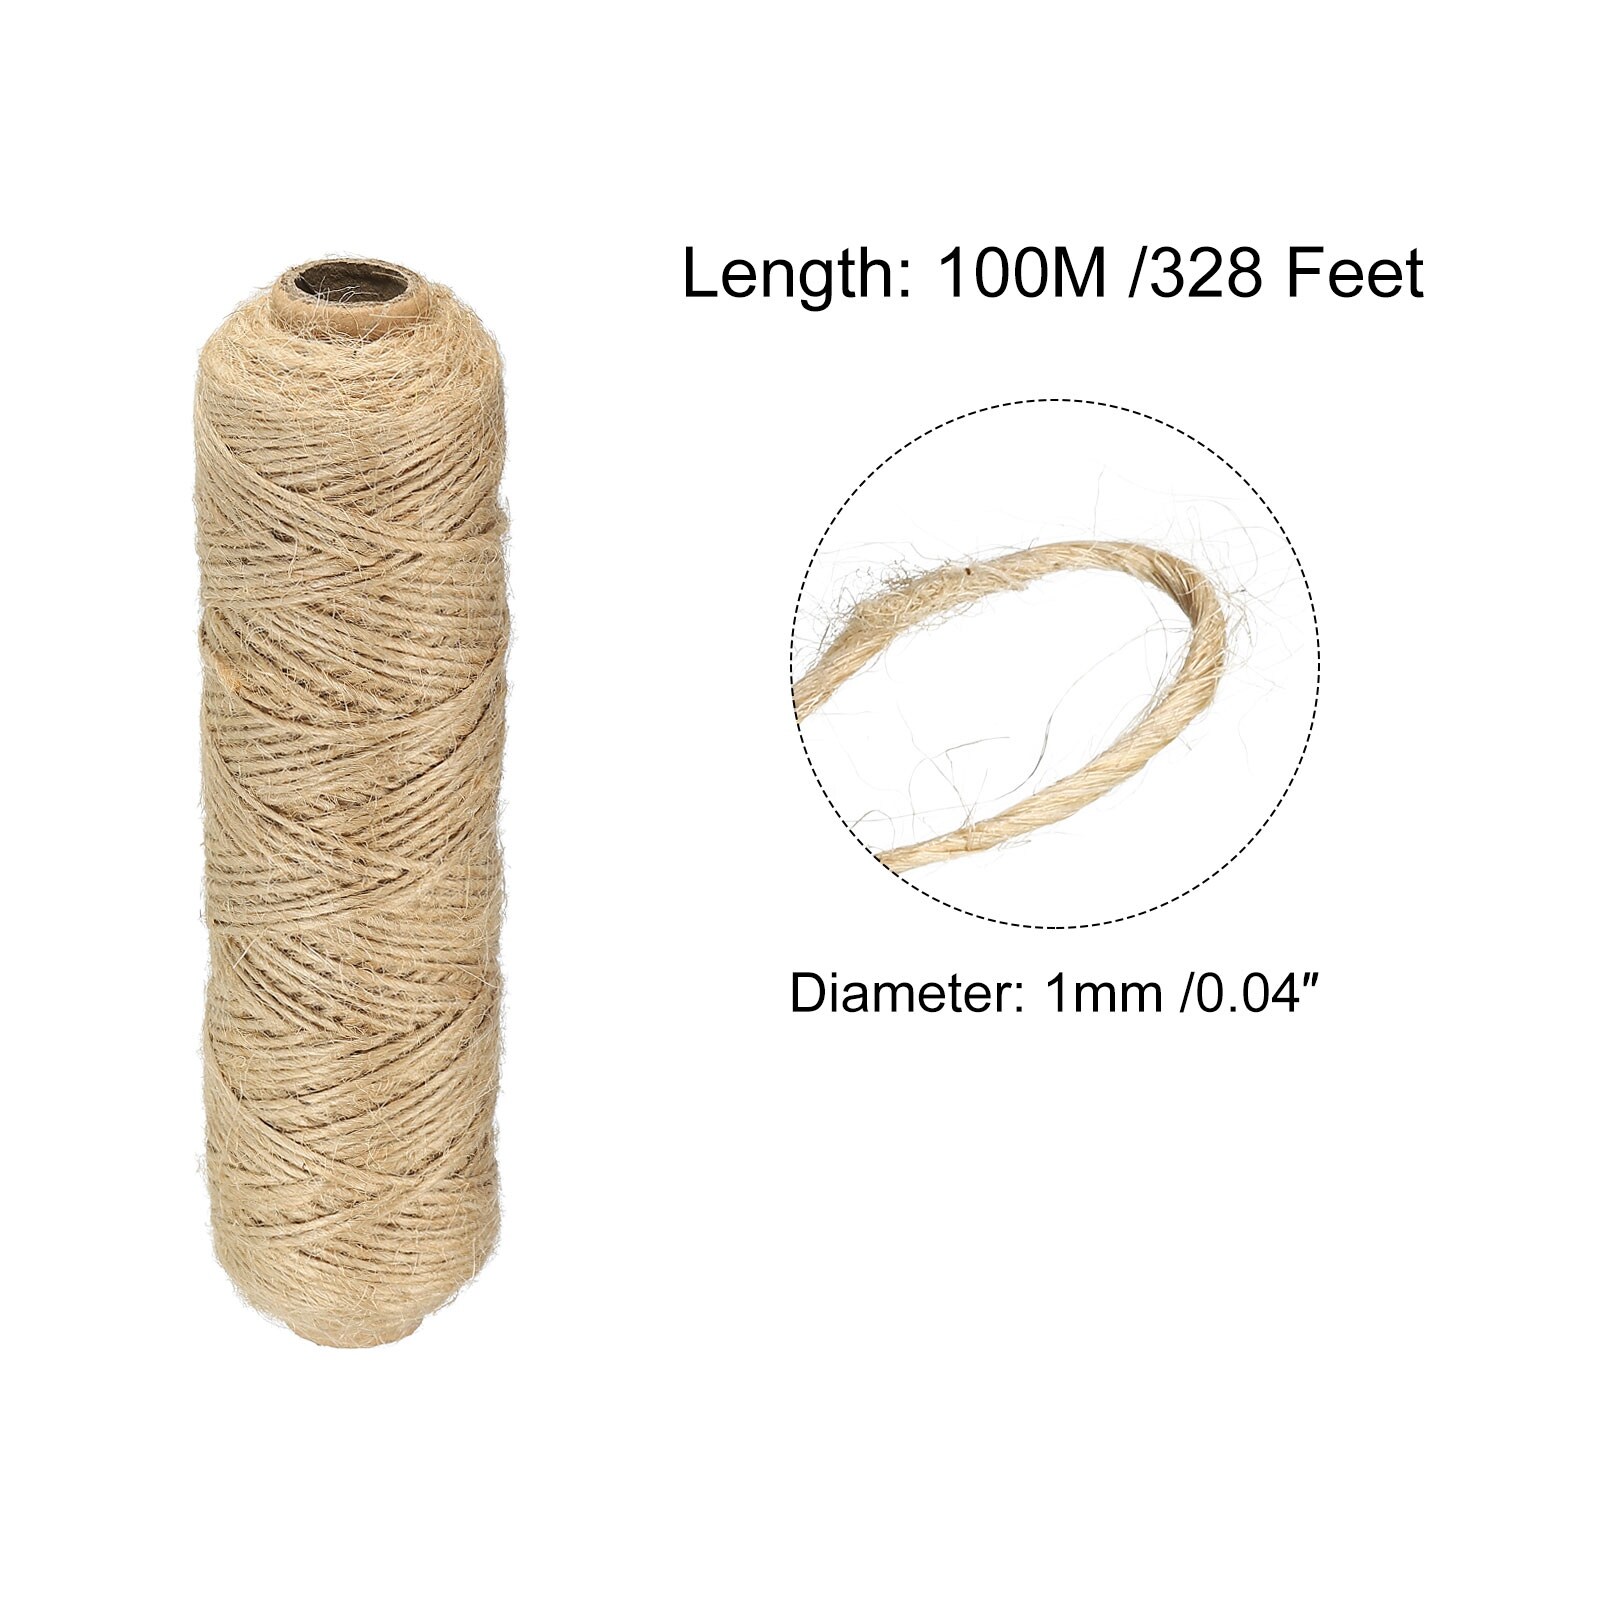 Natural Jute Twine, 33 Feet Long Brown Twine Rope for Crafts, Gift